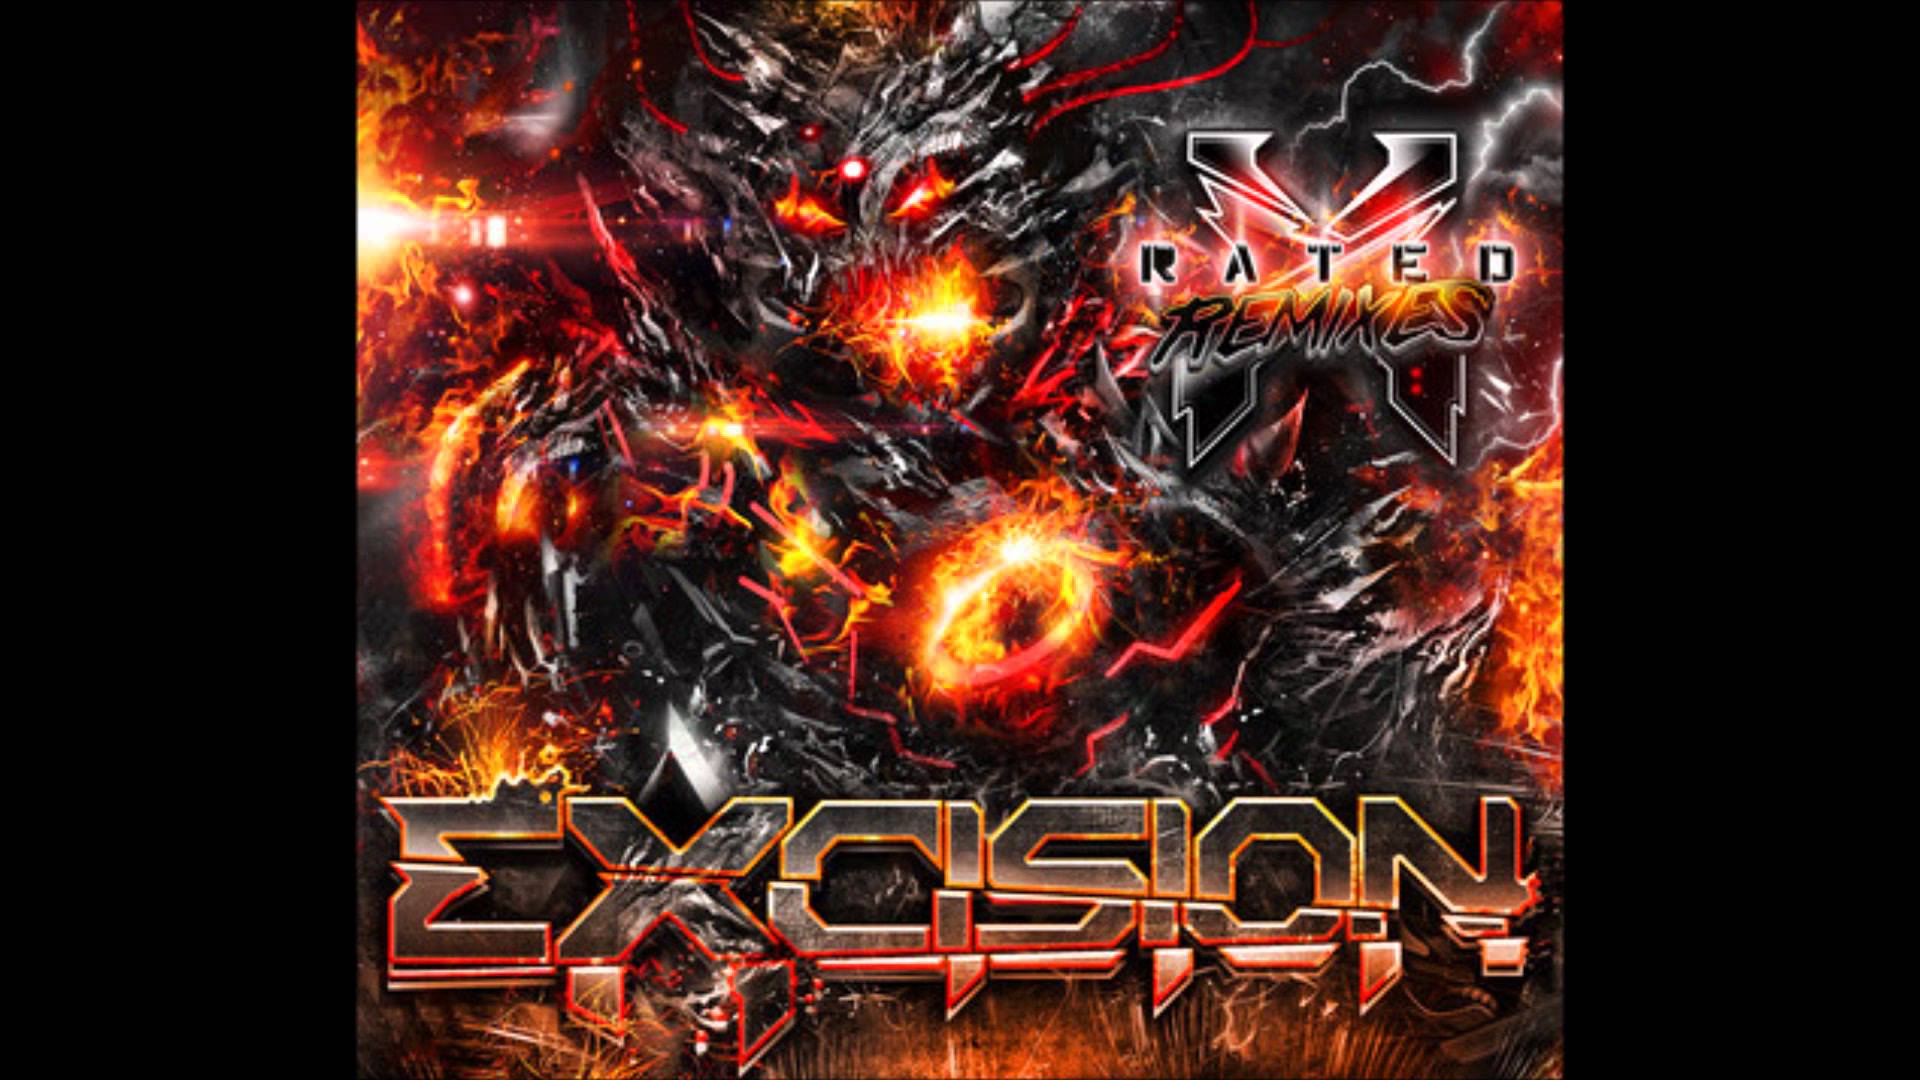 Excision #4